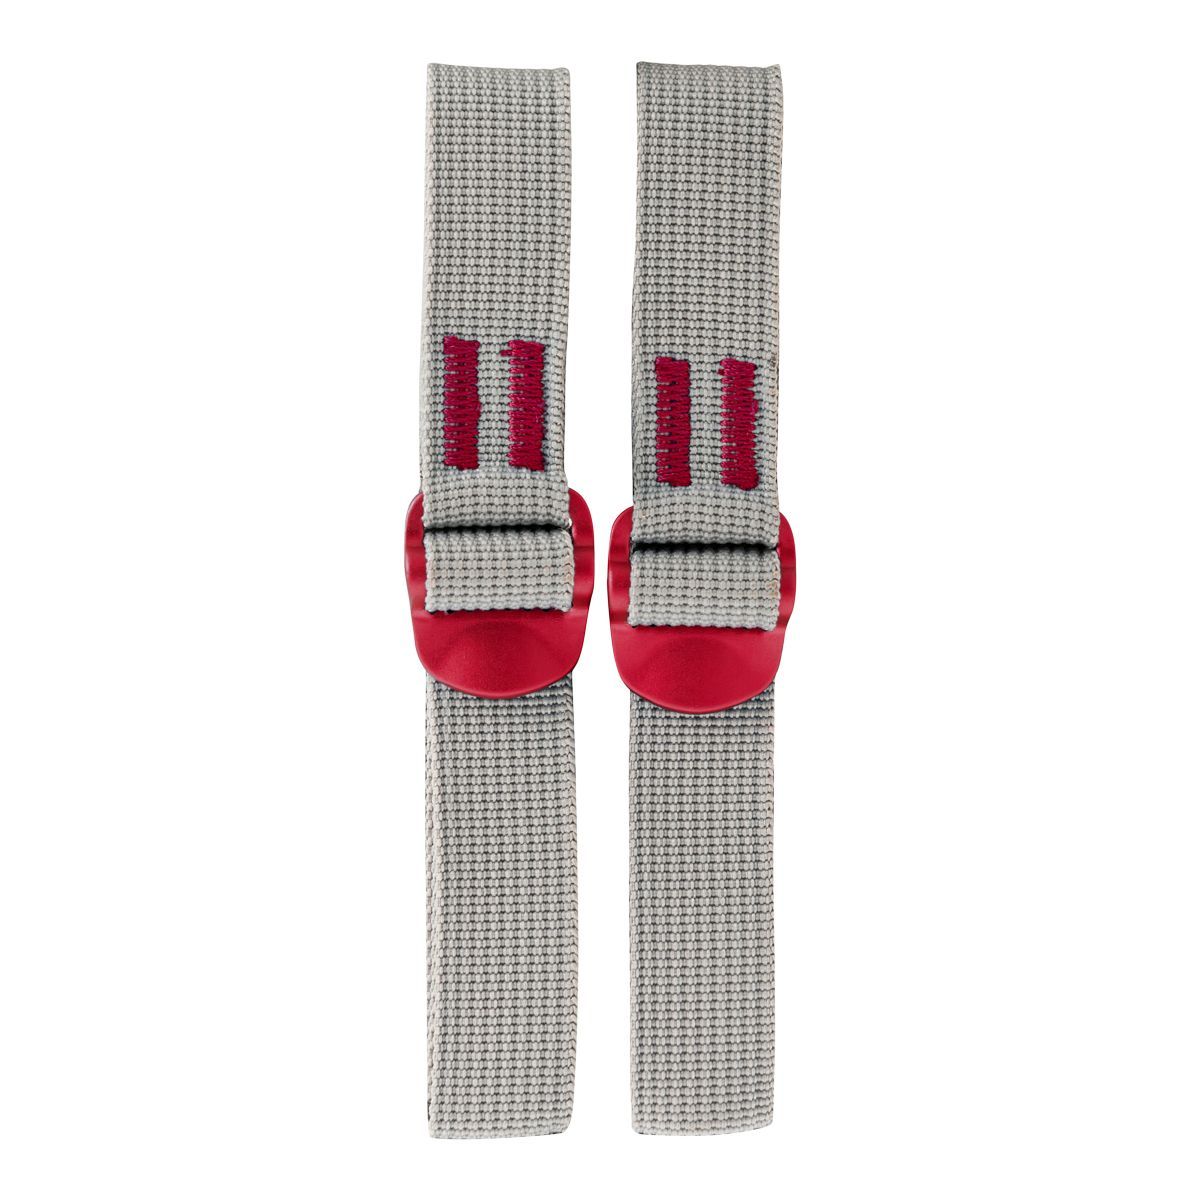 Image of Sea to Summit 20mm Webbing Straps - 2 Pack